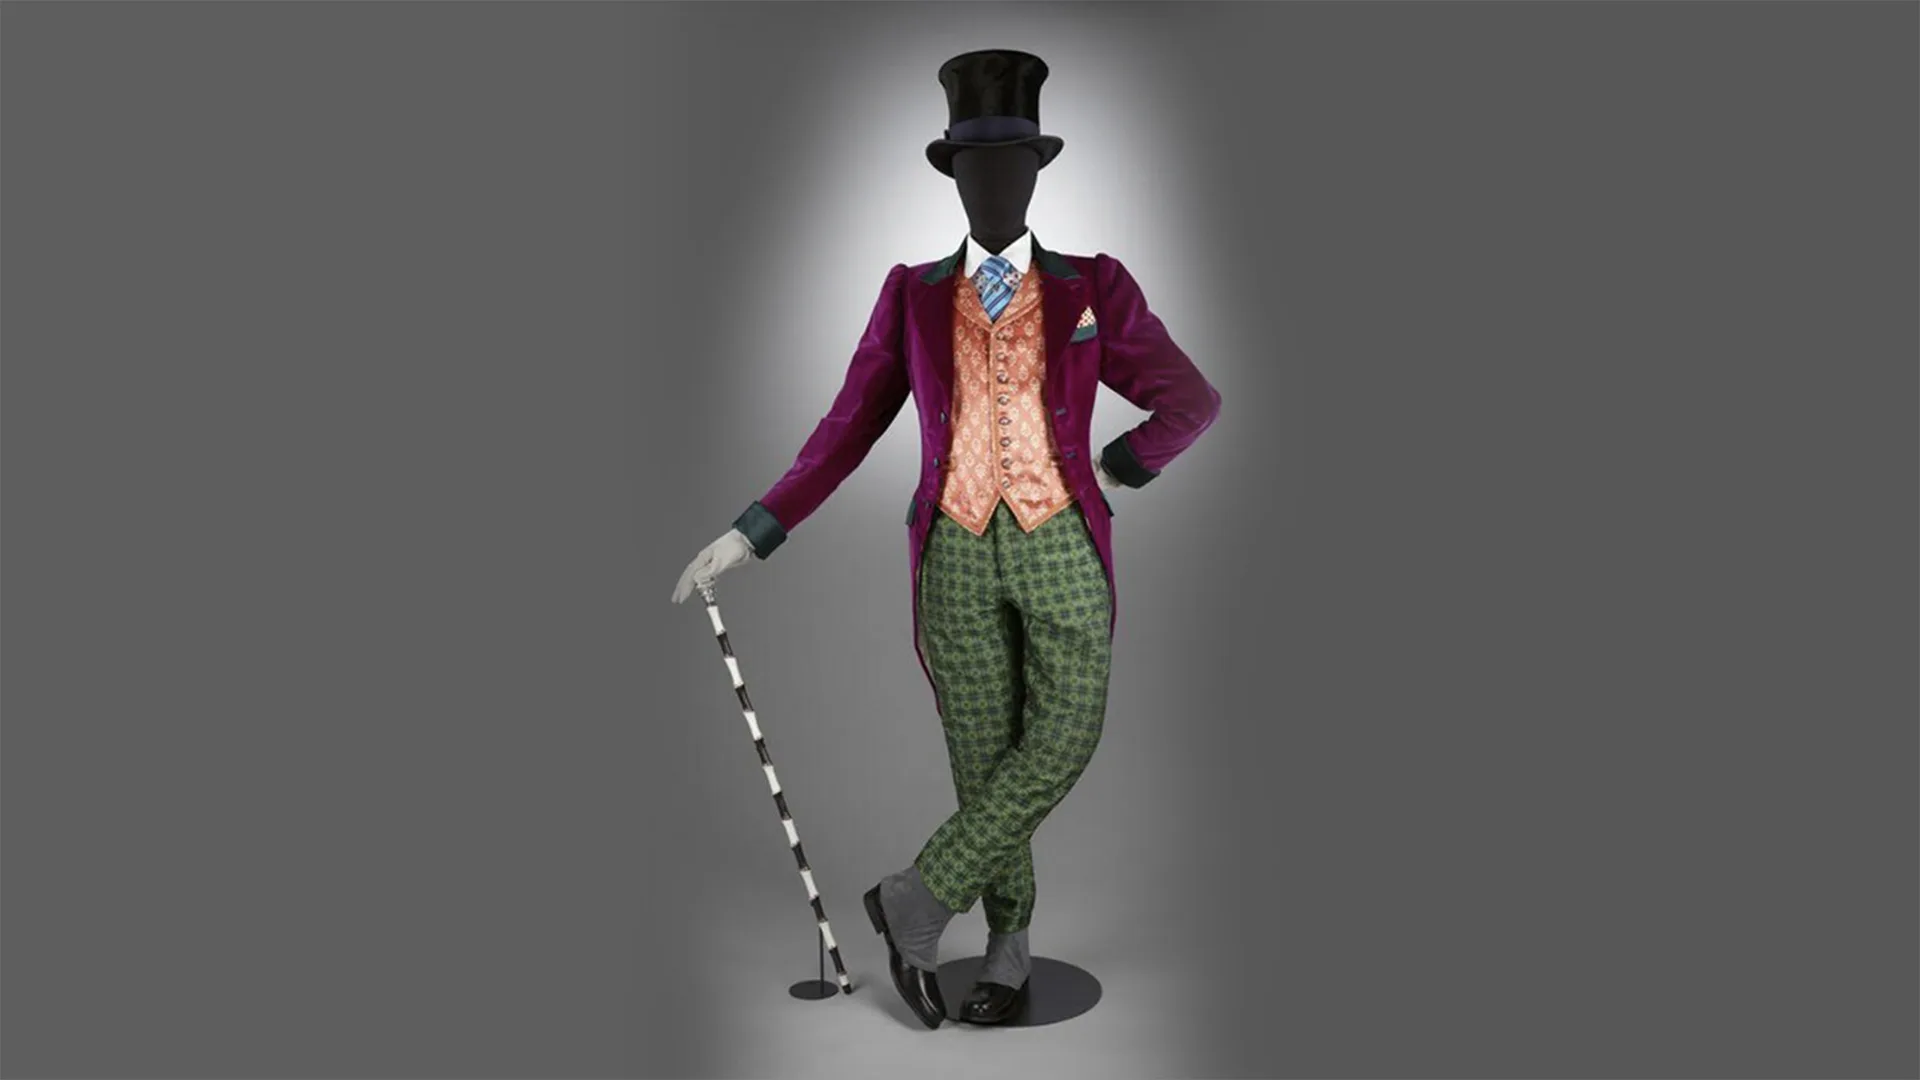 Willy Wonka costume, which shows a top hat, orange waistcoat, dark red jacket and trousers